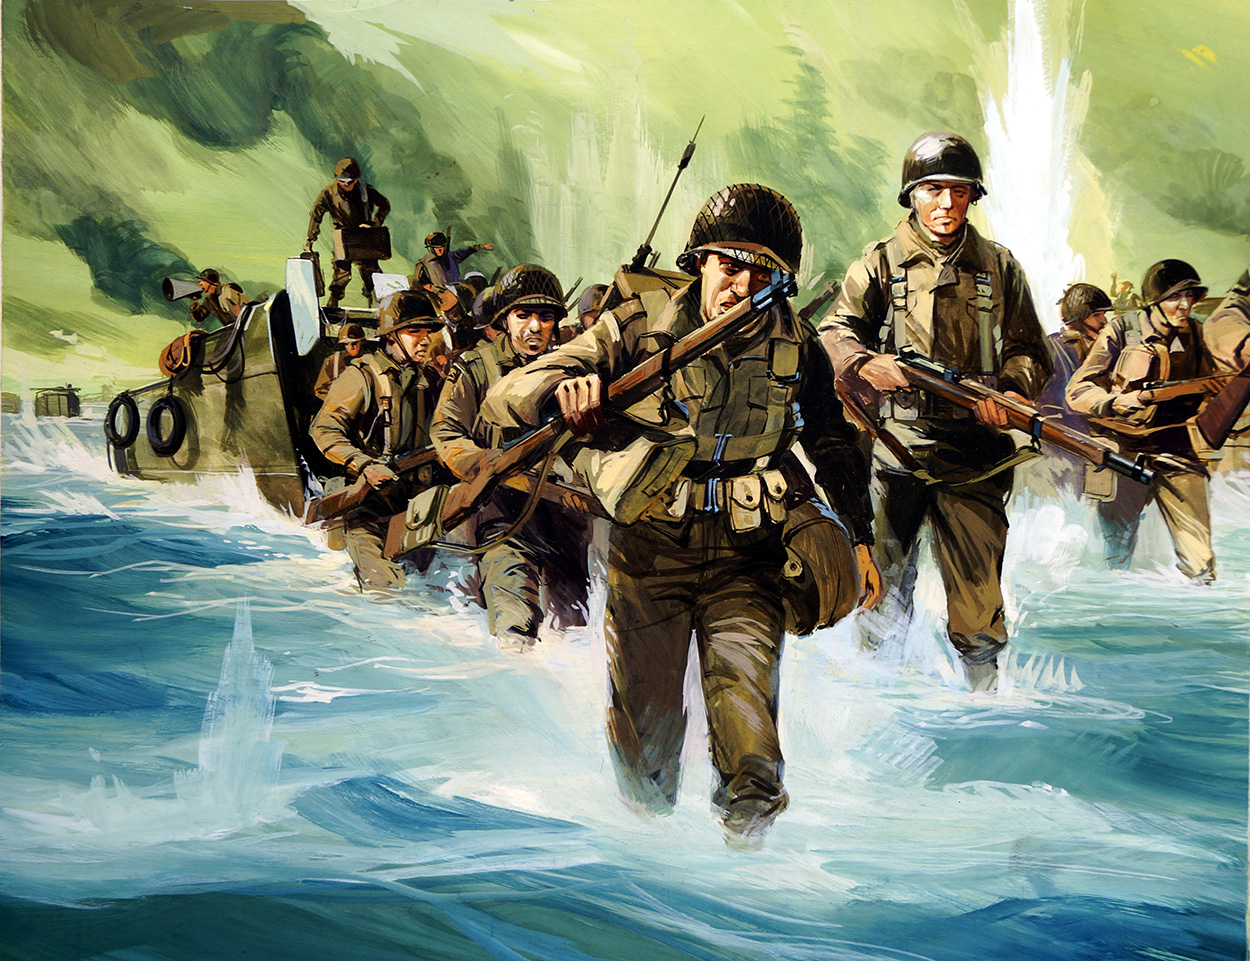 Anzio (Original) art by Gerry Wood Art at The Illustration Art Gallery